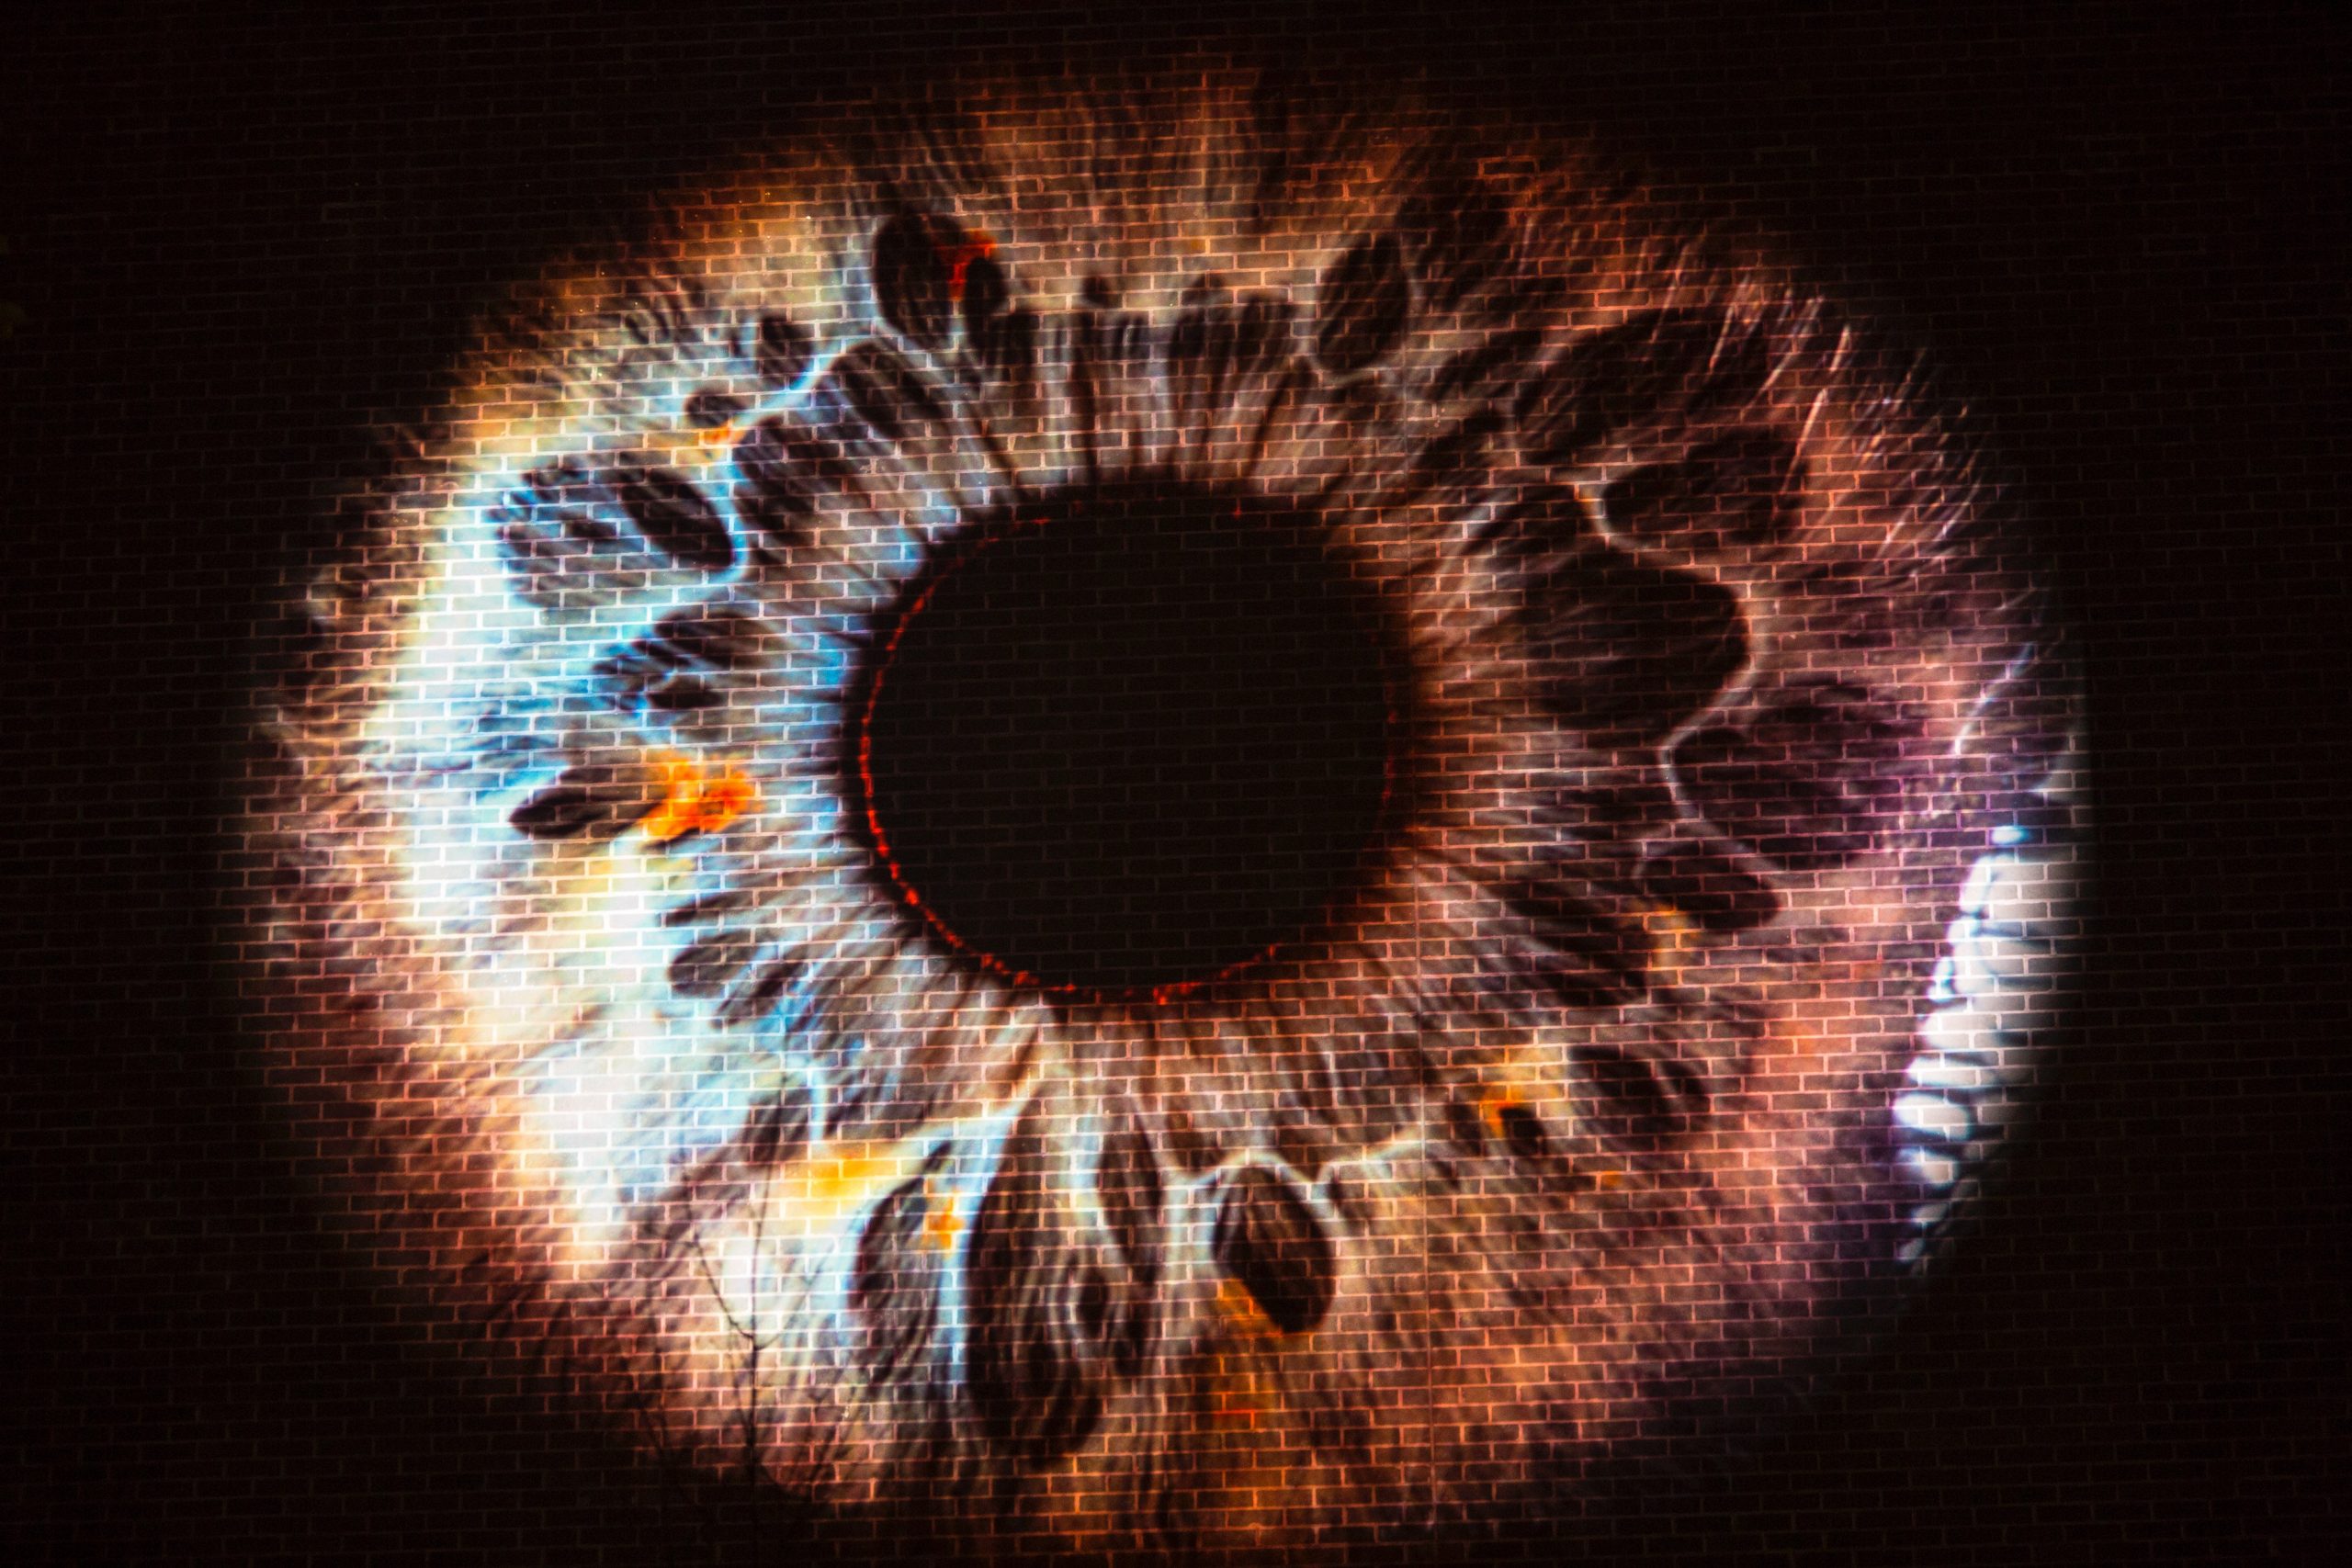 Image of a brown eye projected onto a brick wall